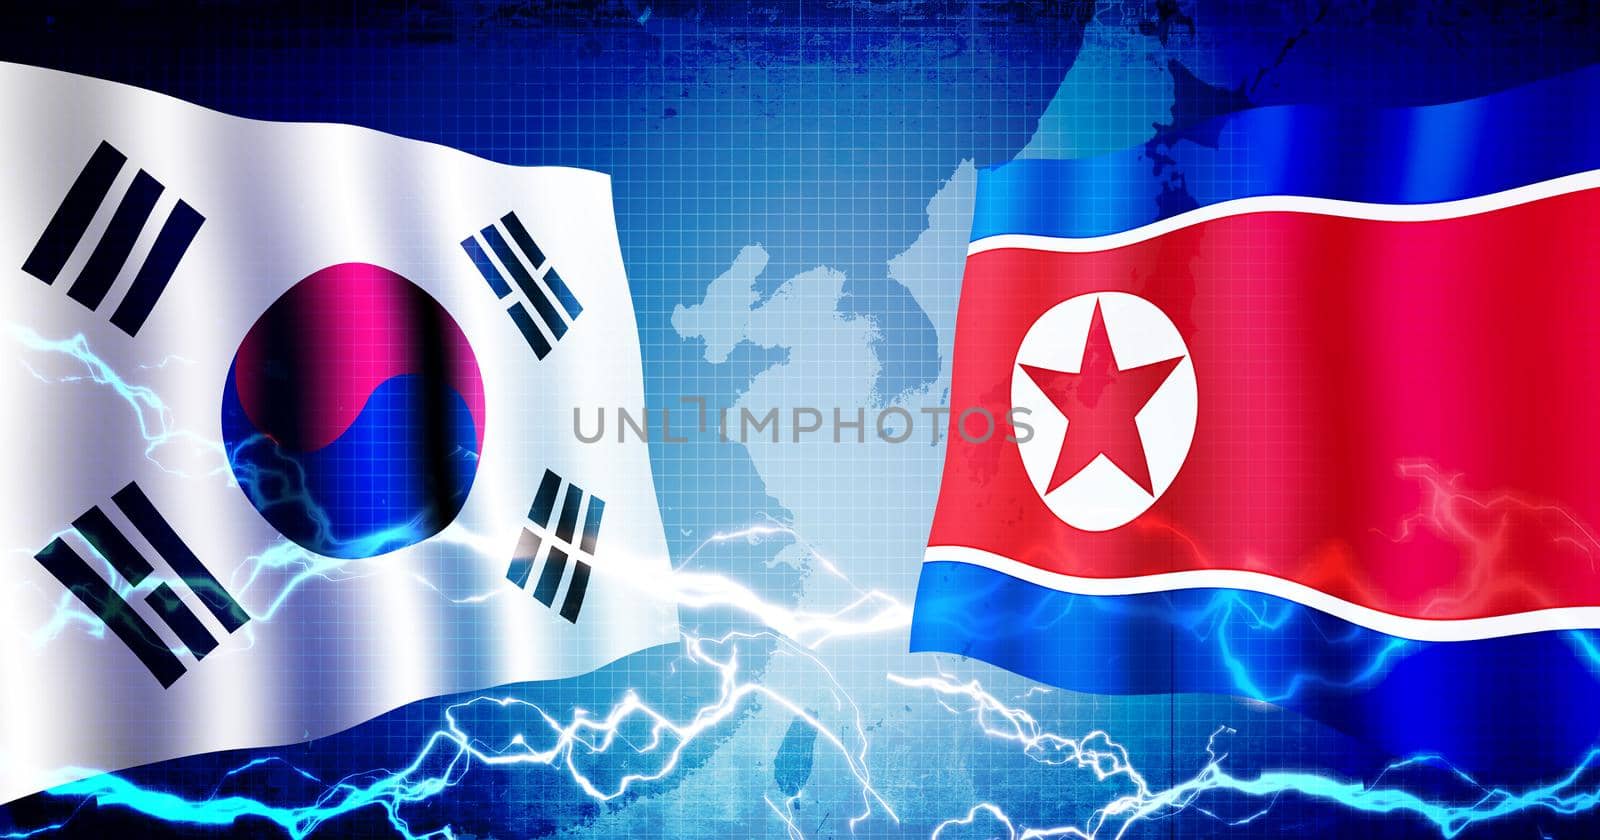 Political confrontation between South korea and North korea / web banner background illustration by barks